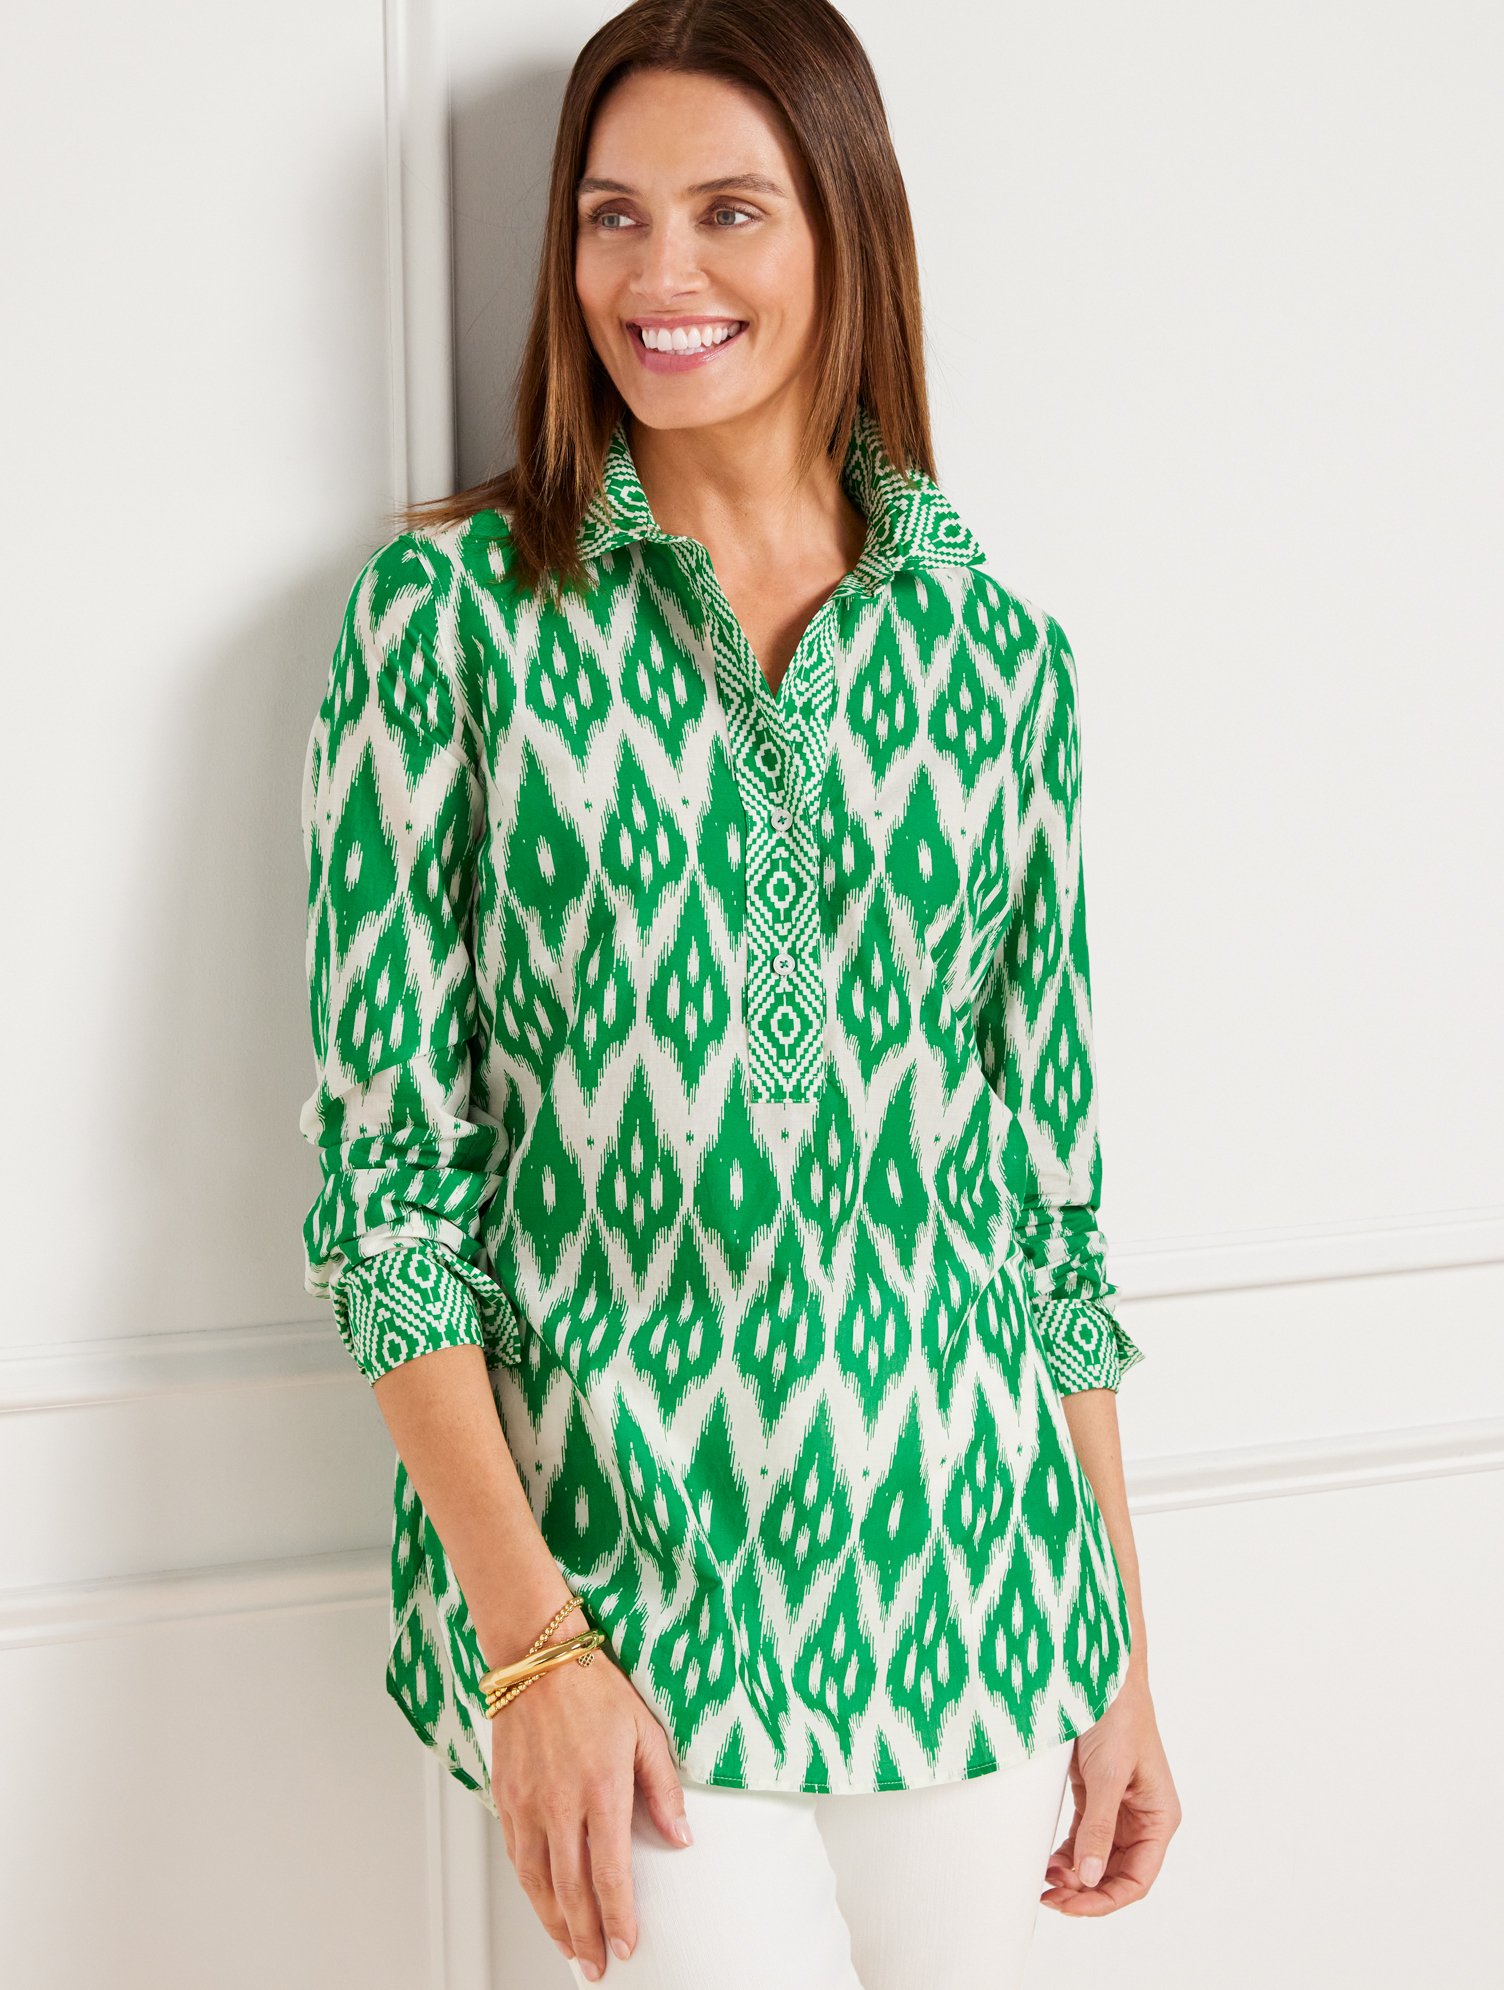 Talbots Leafy Ikat Border Tunic Top - Spring Leaves/ivory - Xl - 100% Cotton  In Spring Leaves,ivory